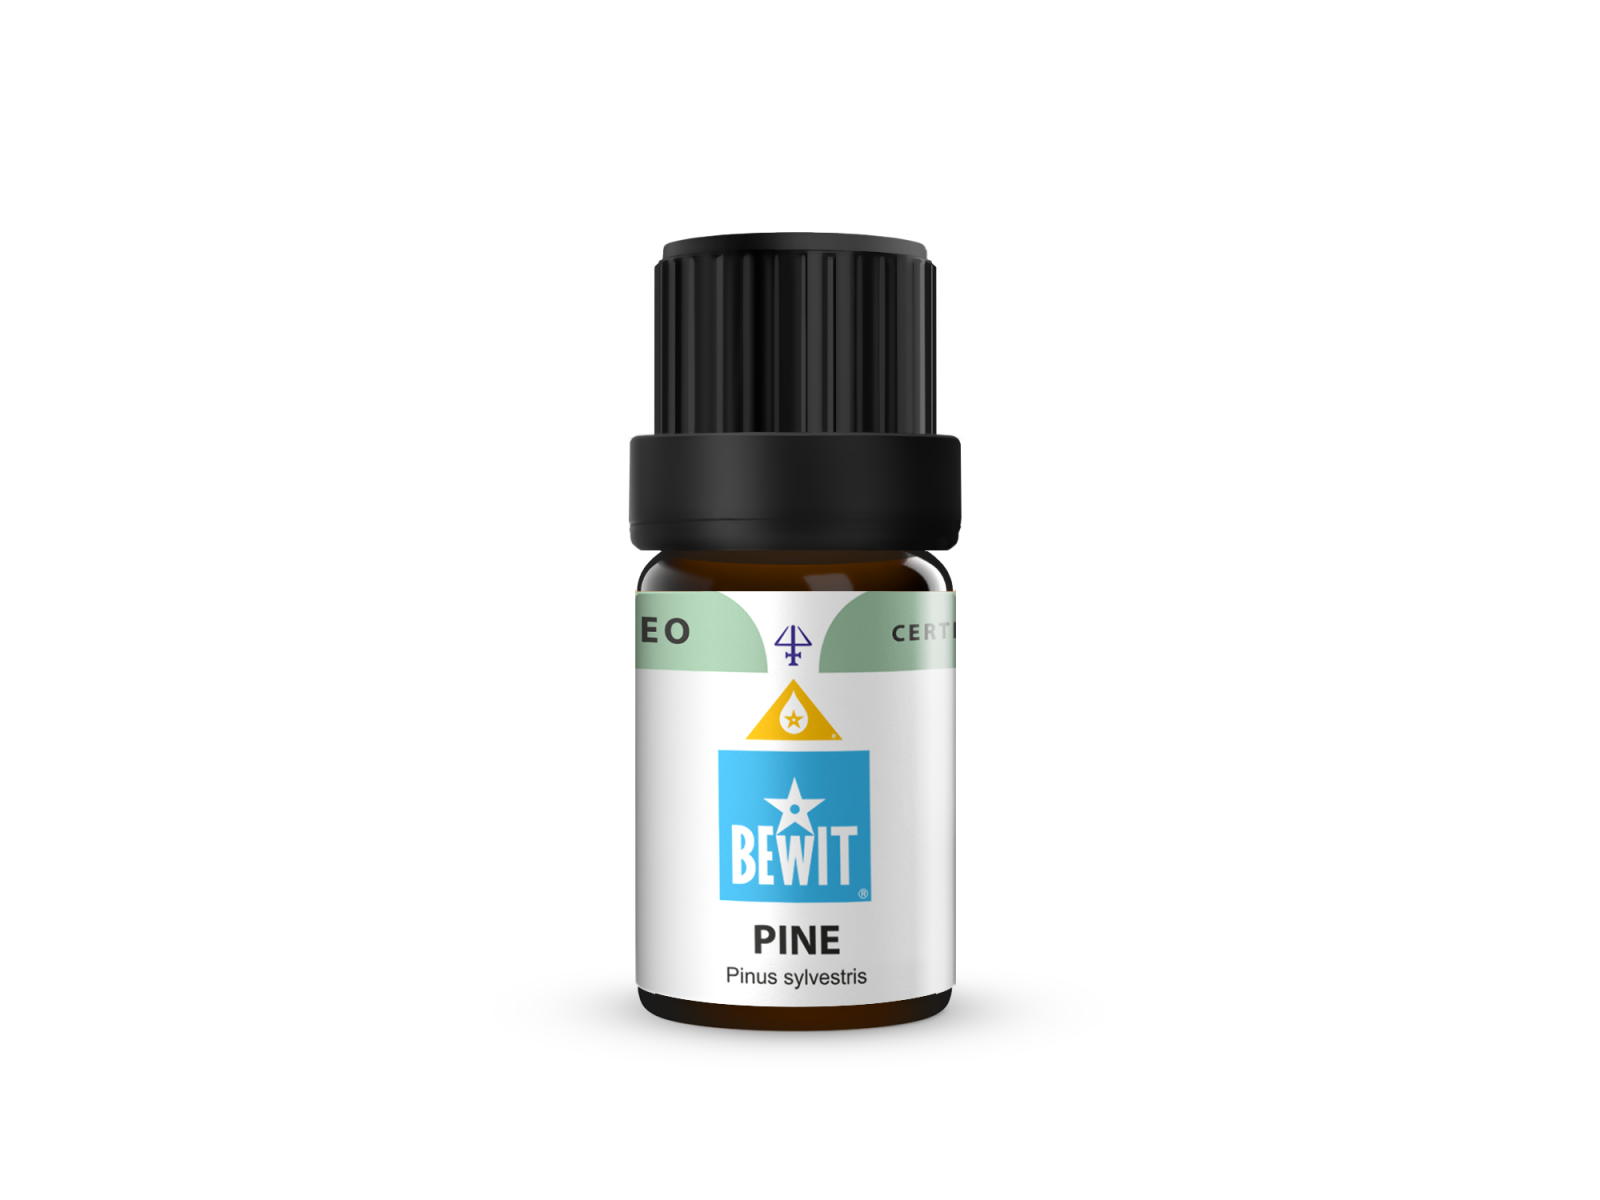 BEWIT Pine - This is a 100% pure essential oil - 2